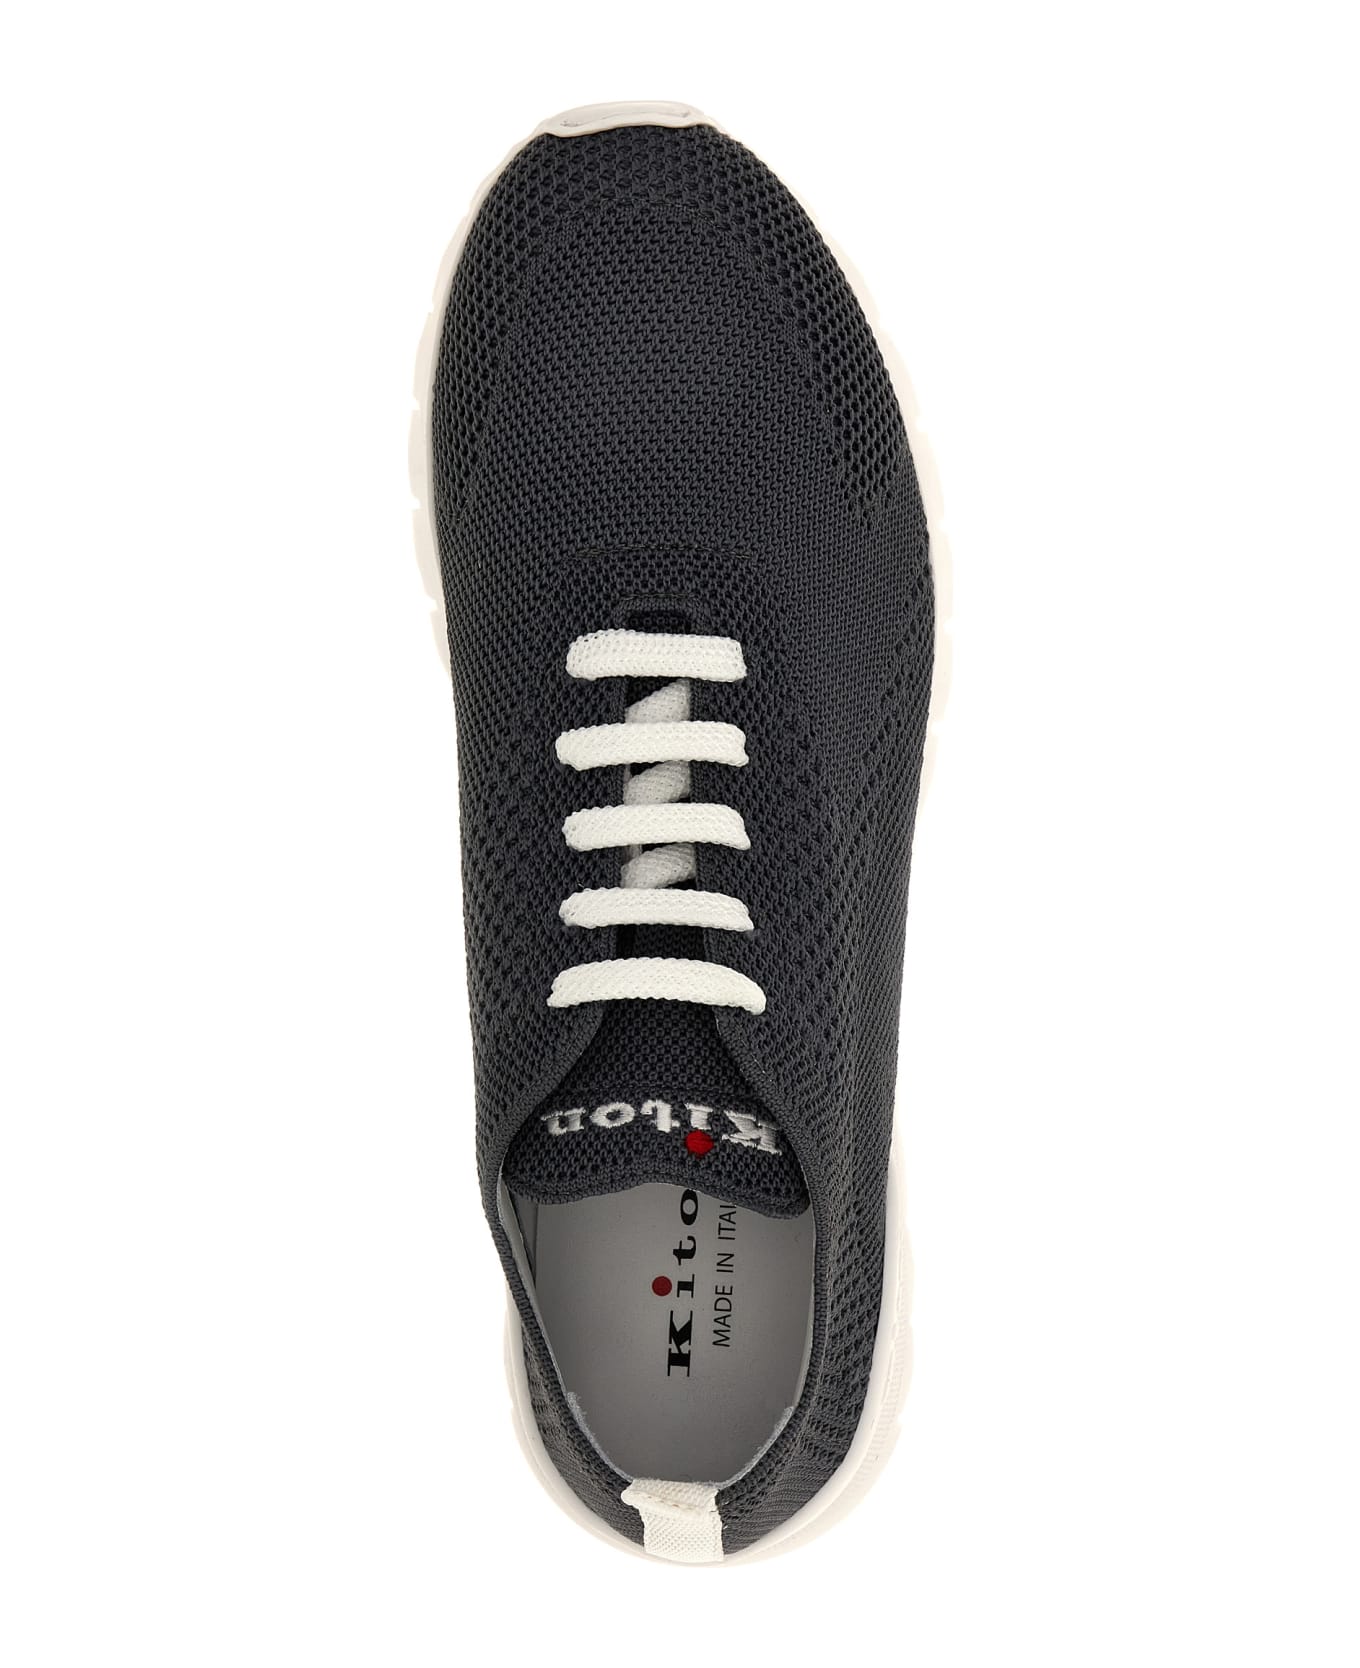 Kiton 'fits' Sneakers - Gray スニーカー